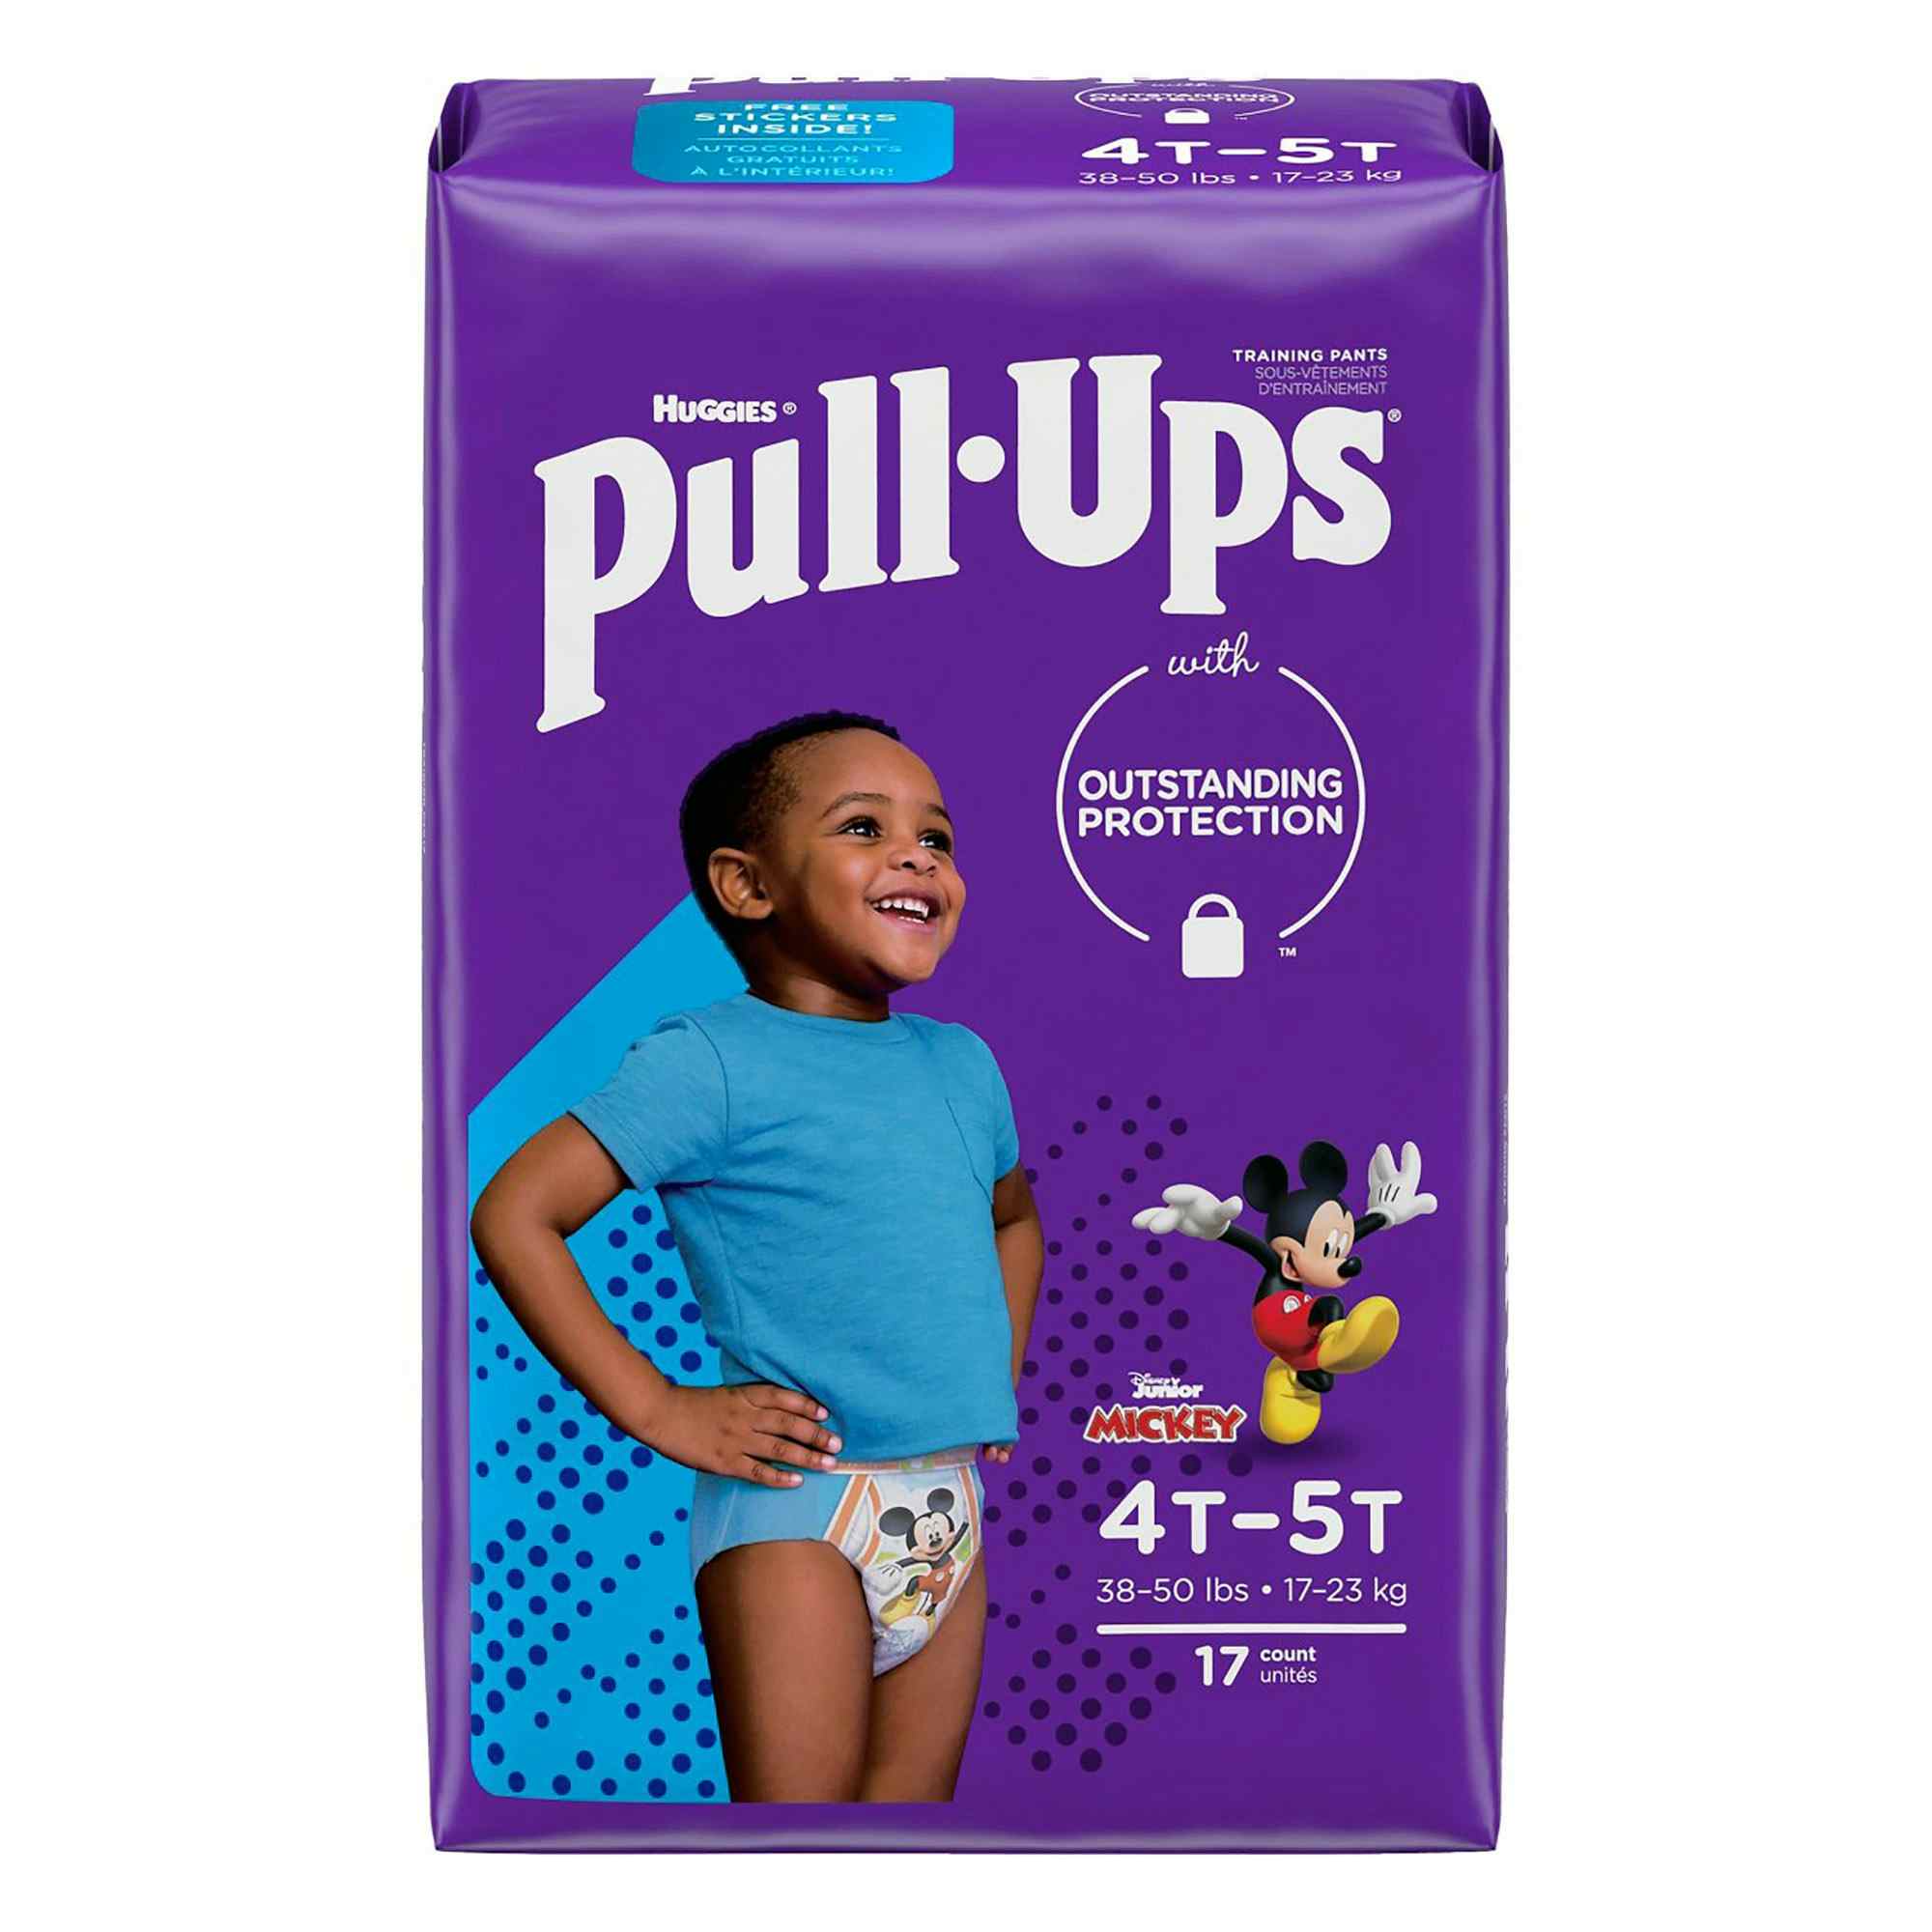 Huggies Boys Pull-Ups with Outstanding Protection, Moderate Absorbency, 51358, 4T-5T (38-50 lbs) - Pack of 17